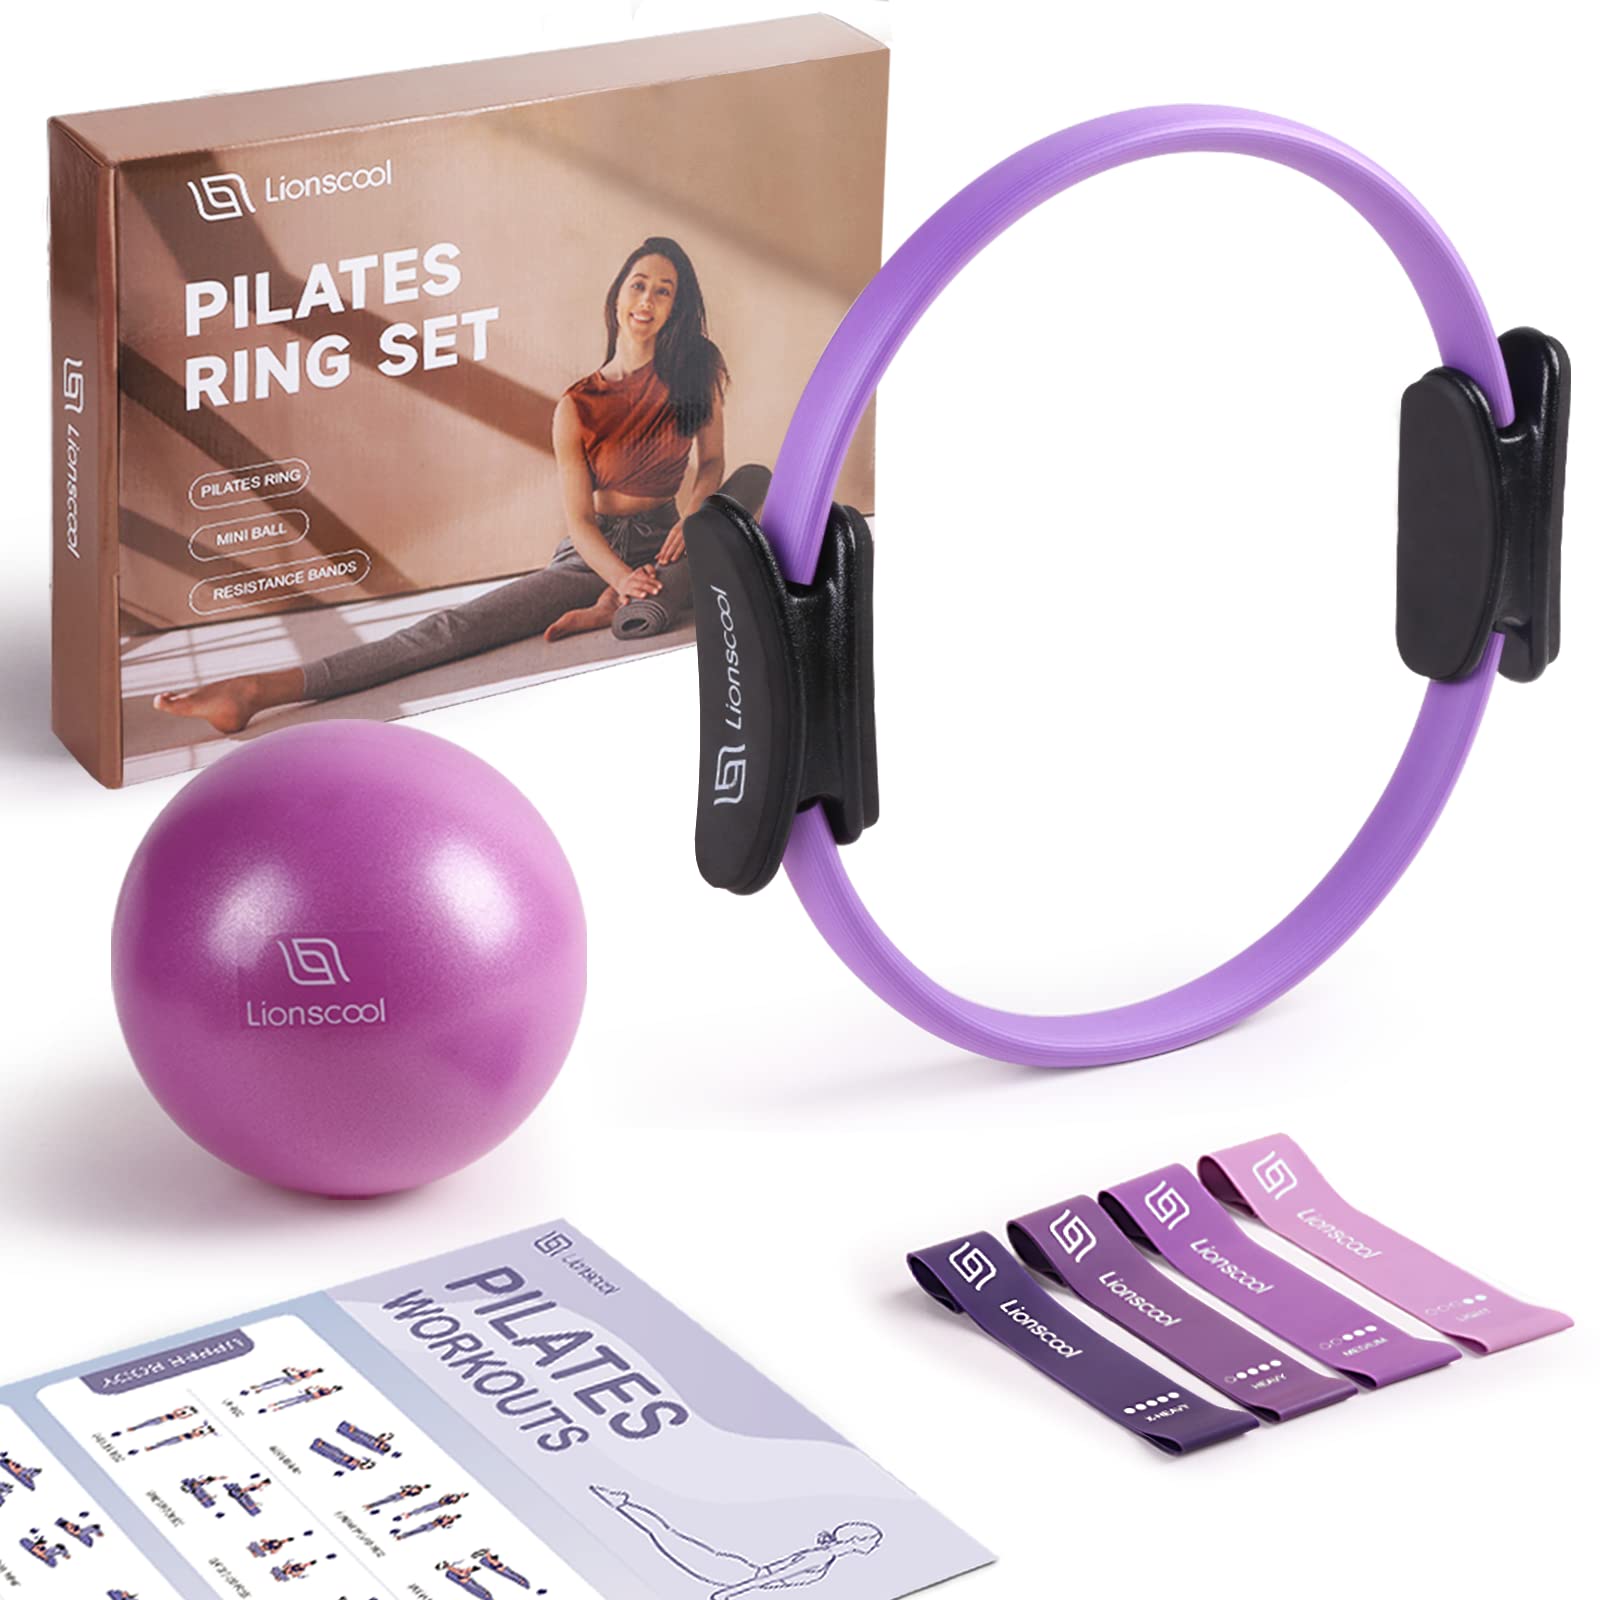 LIONSCOOL PILATES RING SET - Premium Anti-Deformation 14”Magic Circle with  Dual Padded Handles - Includes Burst Resistant Pilates Mini Ball & Highly